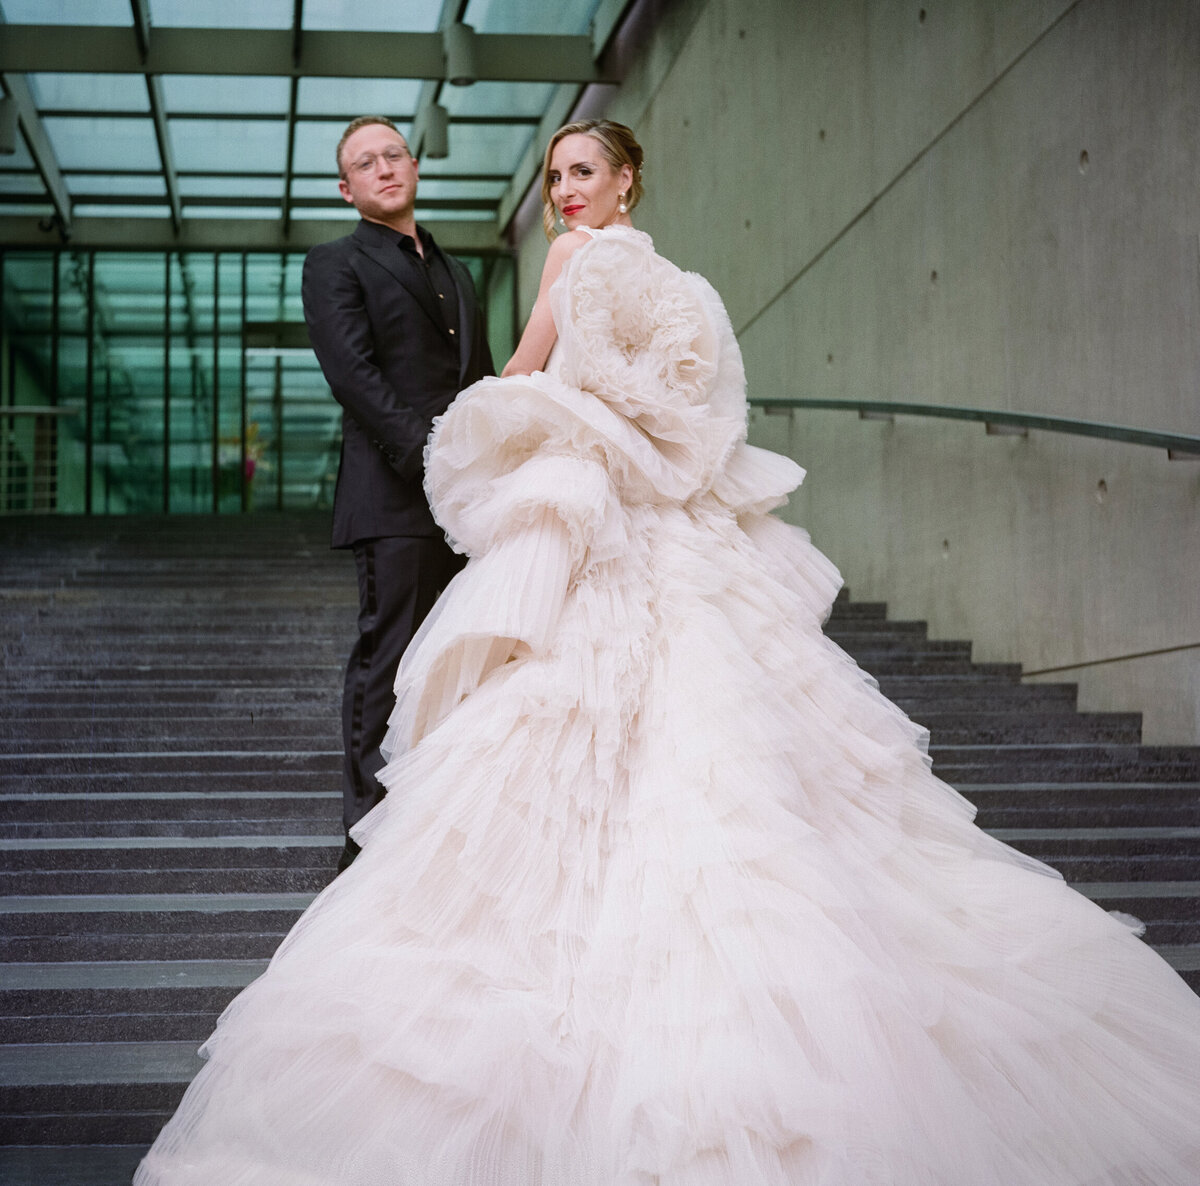 Bride and groom portrait, bride train couture gown